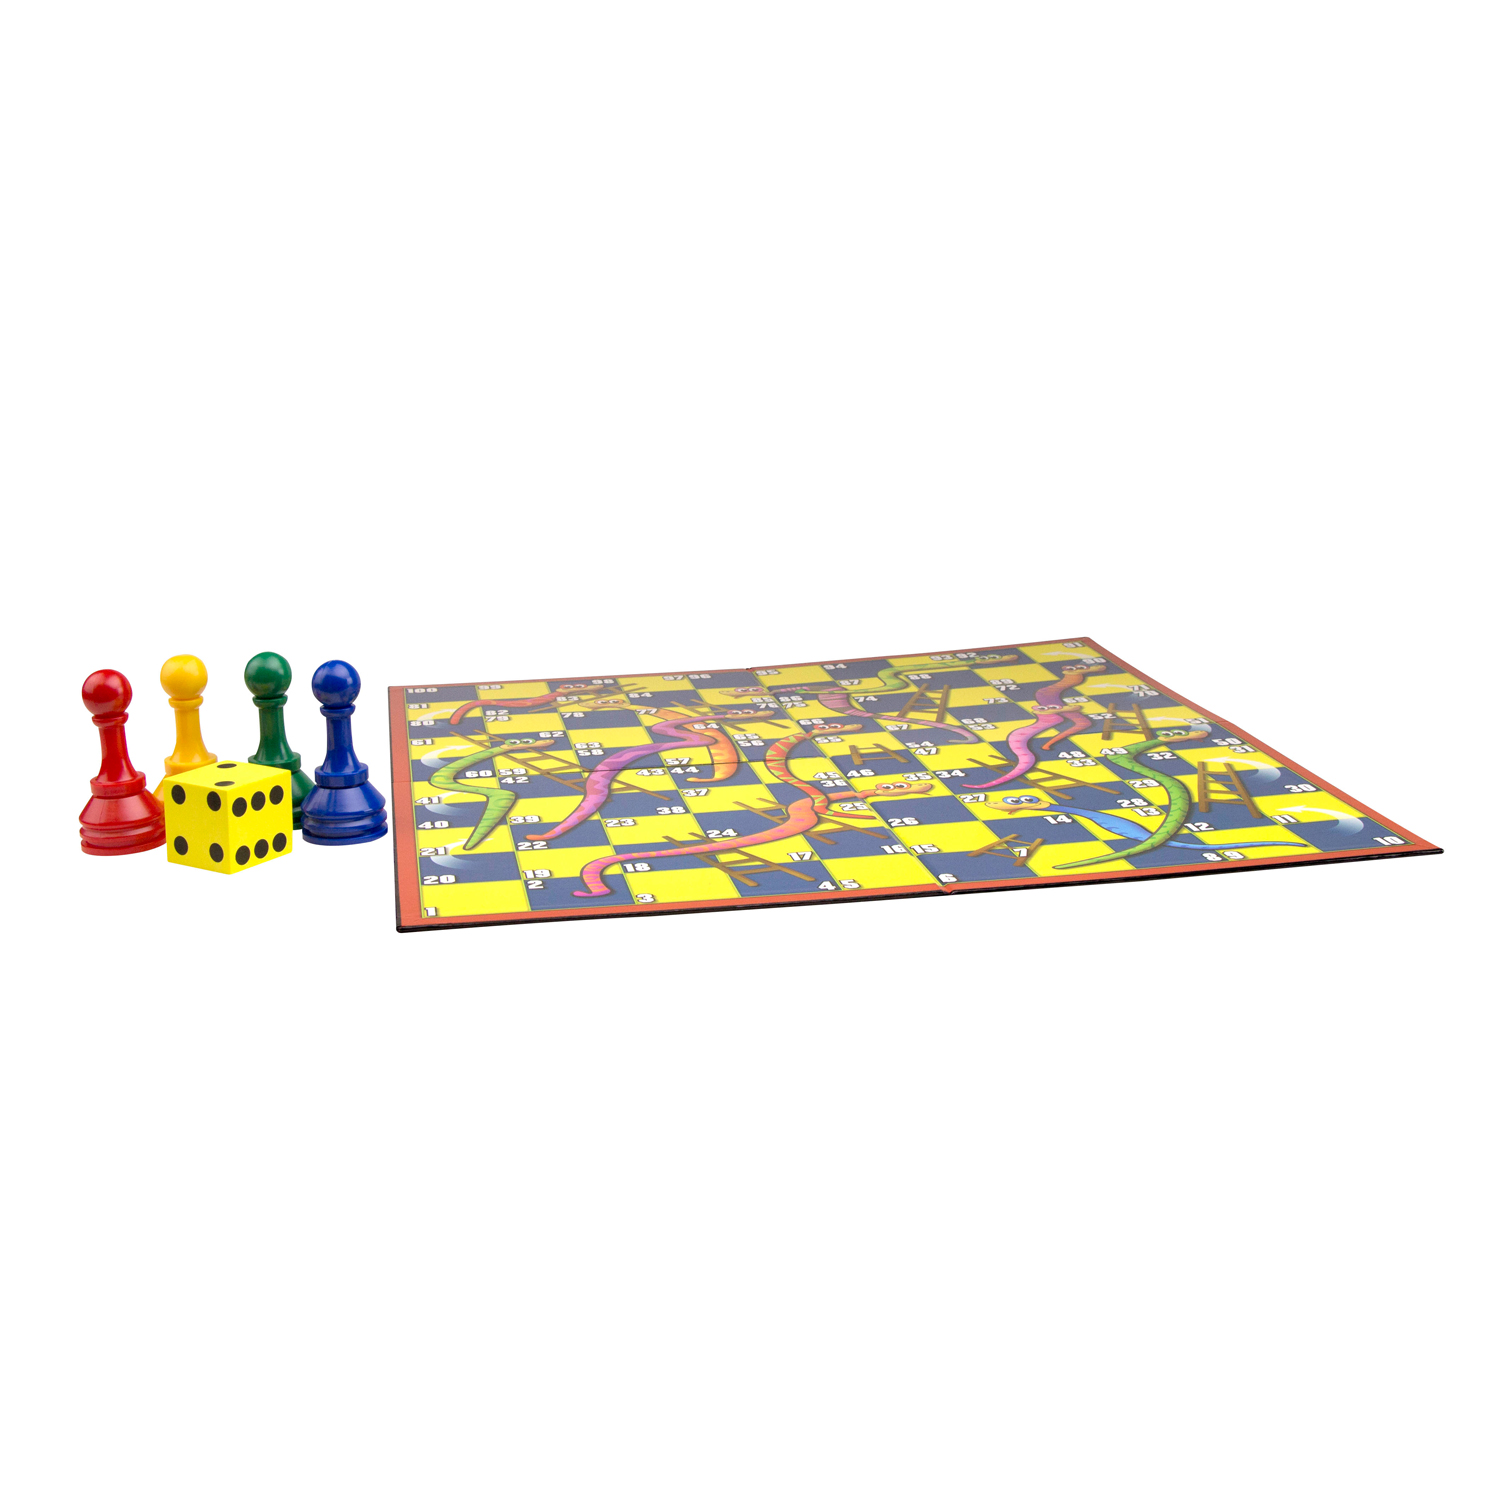 Pressman Toys - Giant Snakes and Ladders Game - image 3 of 4